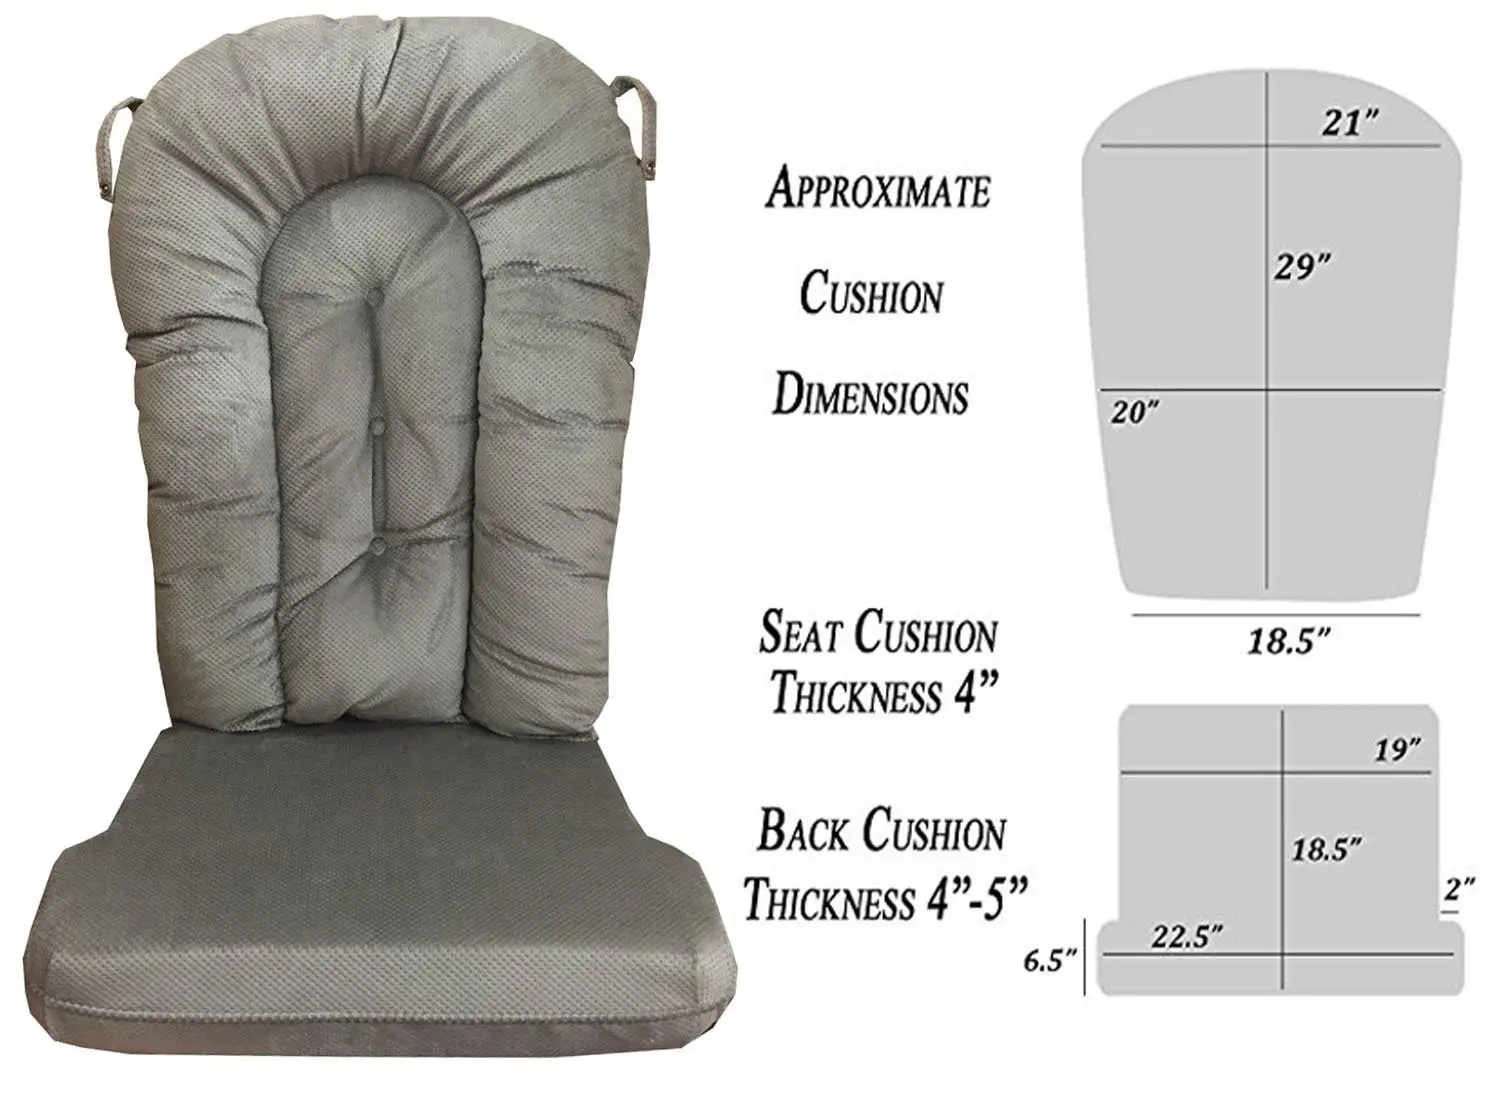 graco glider cushion replacement